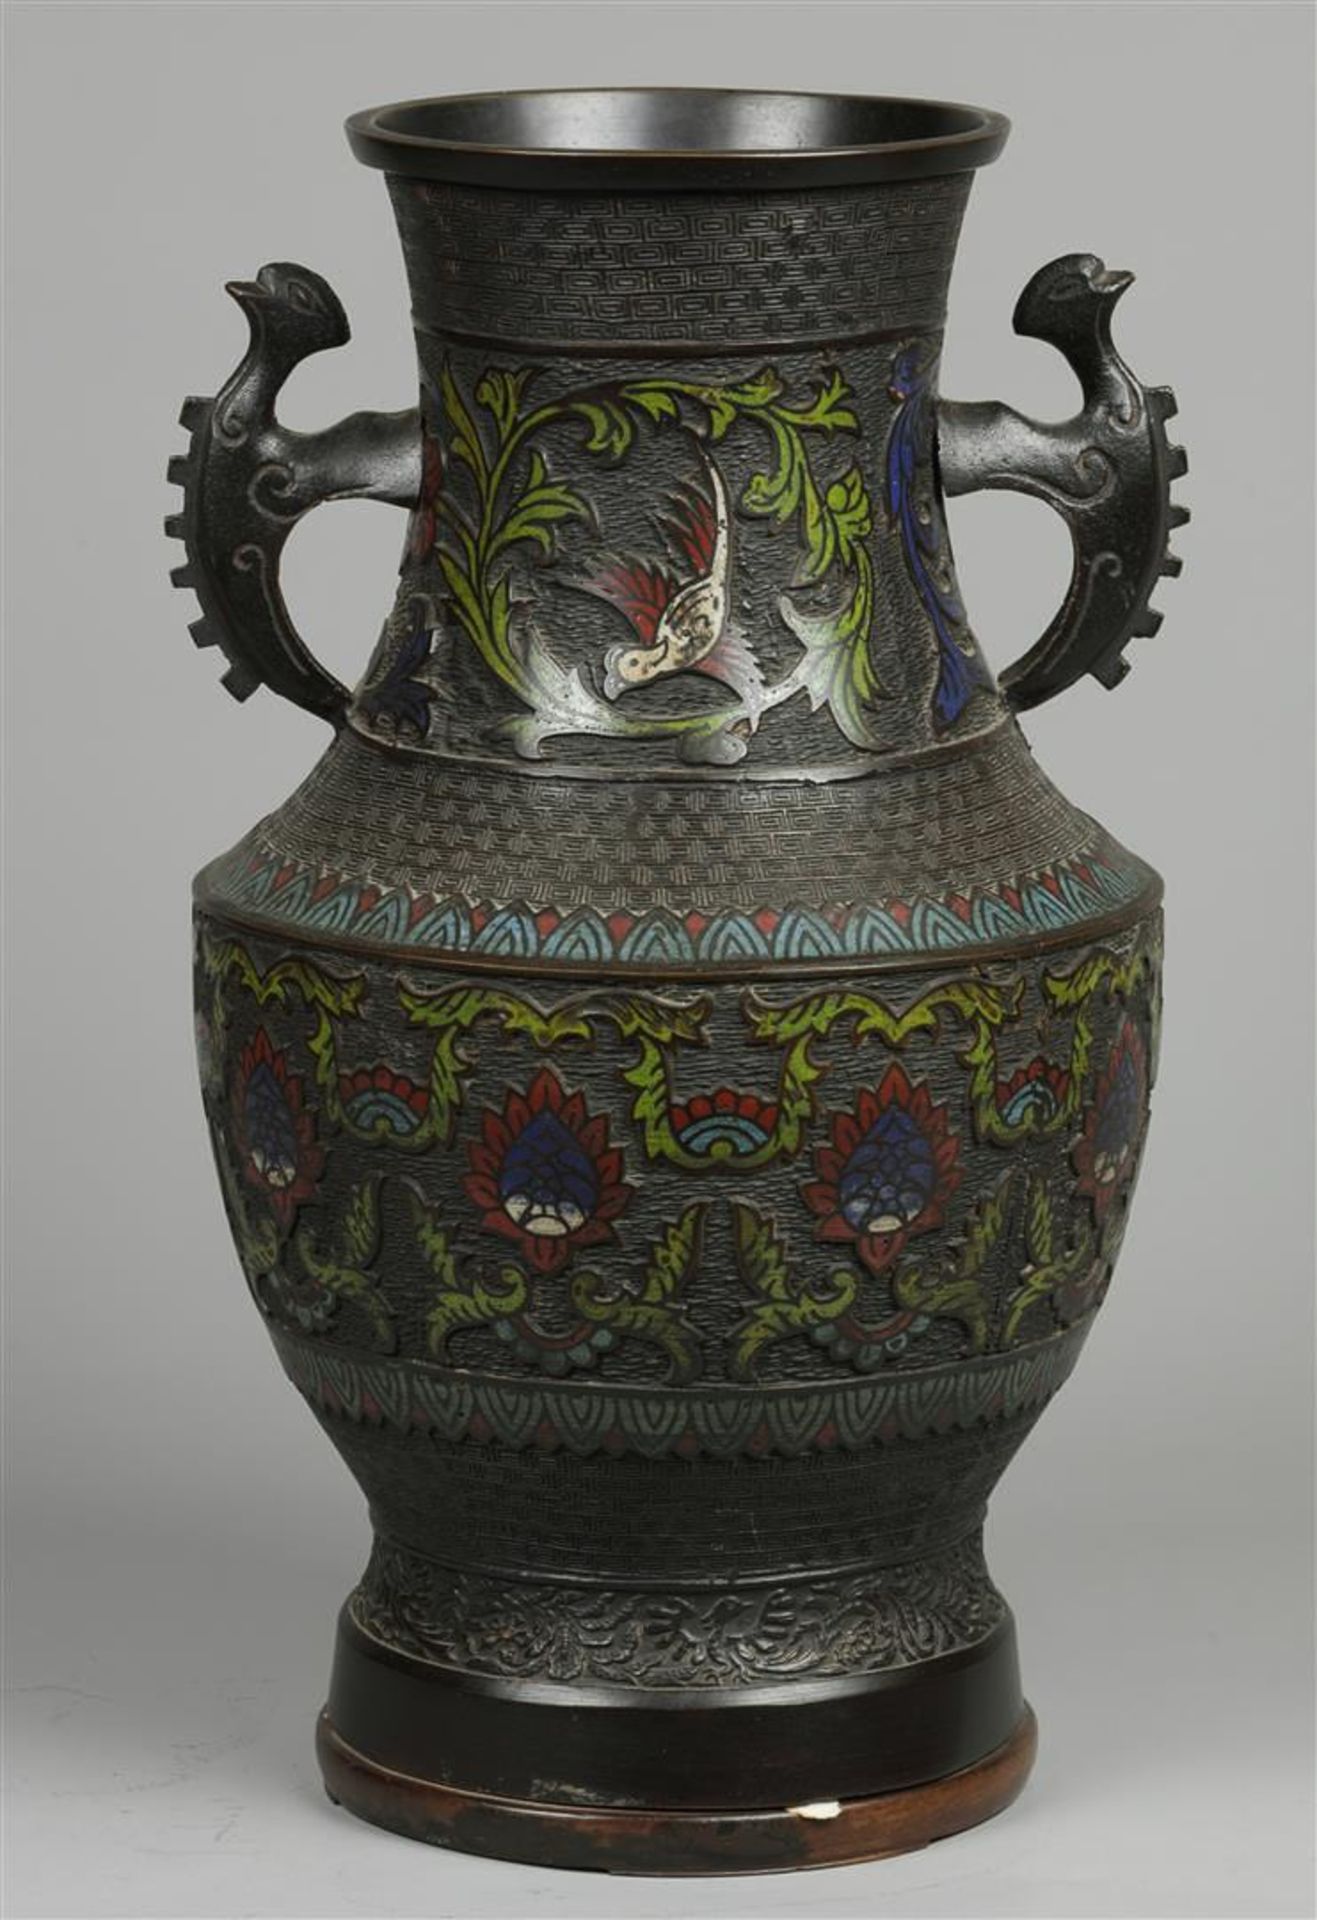 A cloisonné vase decorated with birds and plants. Japan, late 19th century.